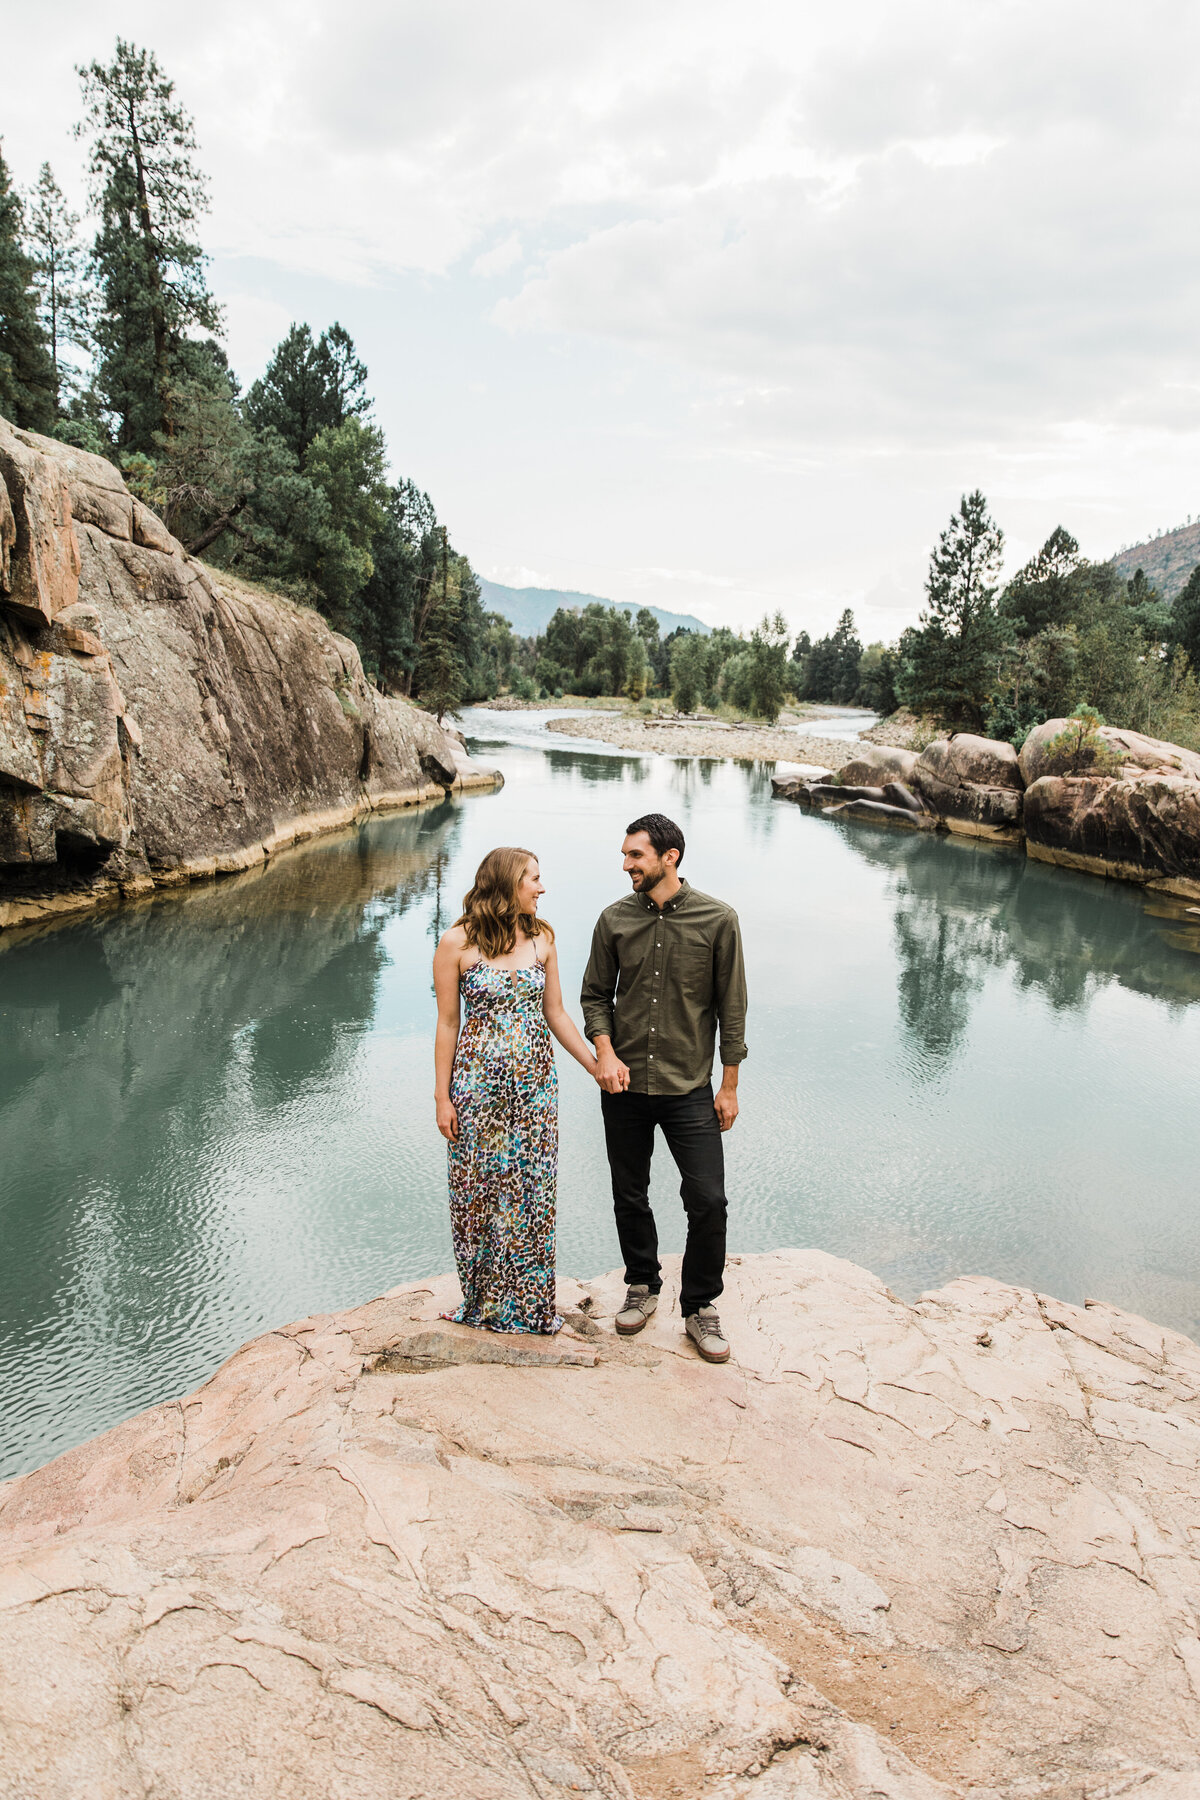 A couple holding hands and standing on a large rock in front of the Animas River during their engagement session in Durango, Colorado. The woman on the left is wearing a long, vibrant, colorful dress. The man on the right is wearing a dark green dress shirt and dark pants. Trees. rocks, and mountains can be seen behind them beyond the river.